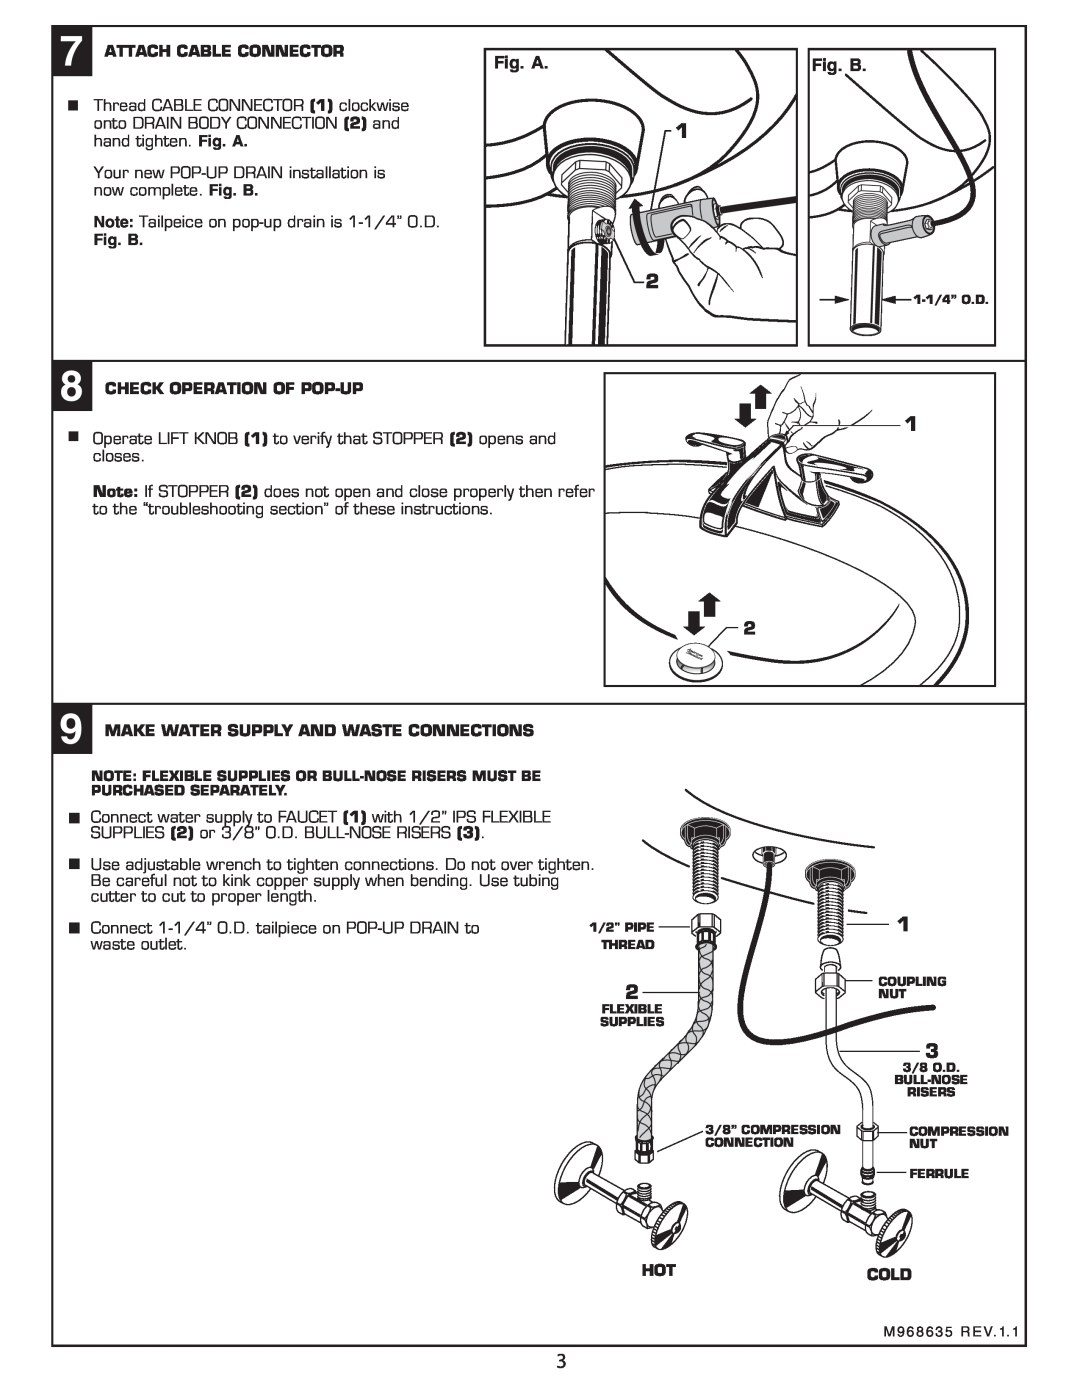 American Standard Centerset Lavatory Faucet Fig. A, Fig. B, Attach Cable Connector, Check Operation Of Pop-Up, closes 